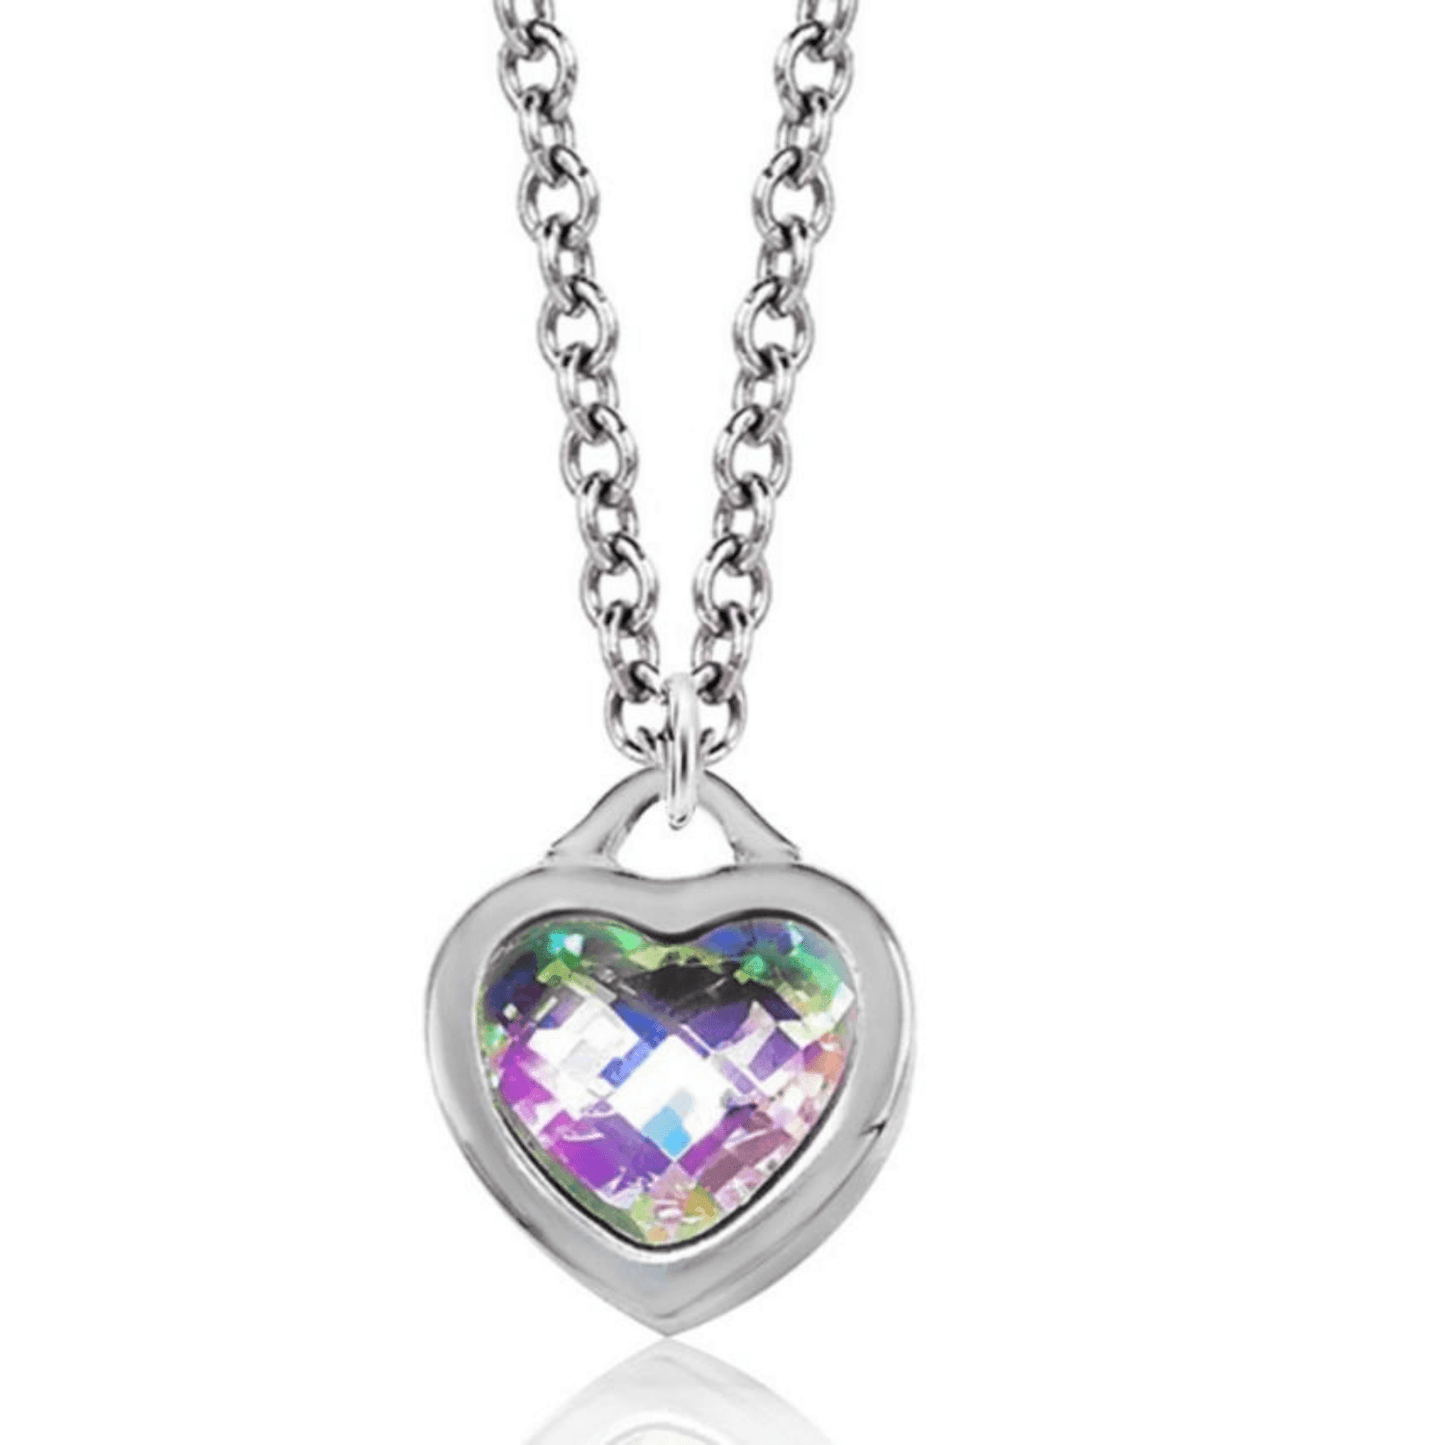 Crystal AB Heart Necklace - J & S Expressions